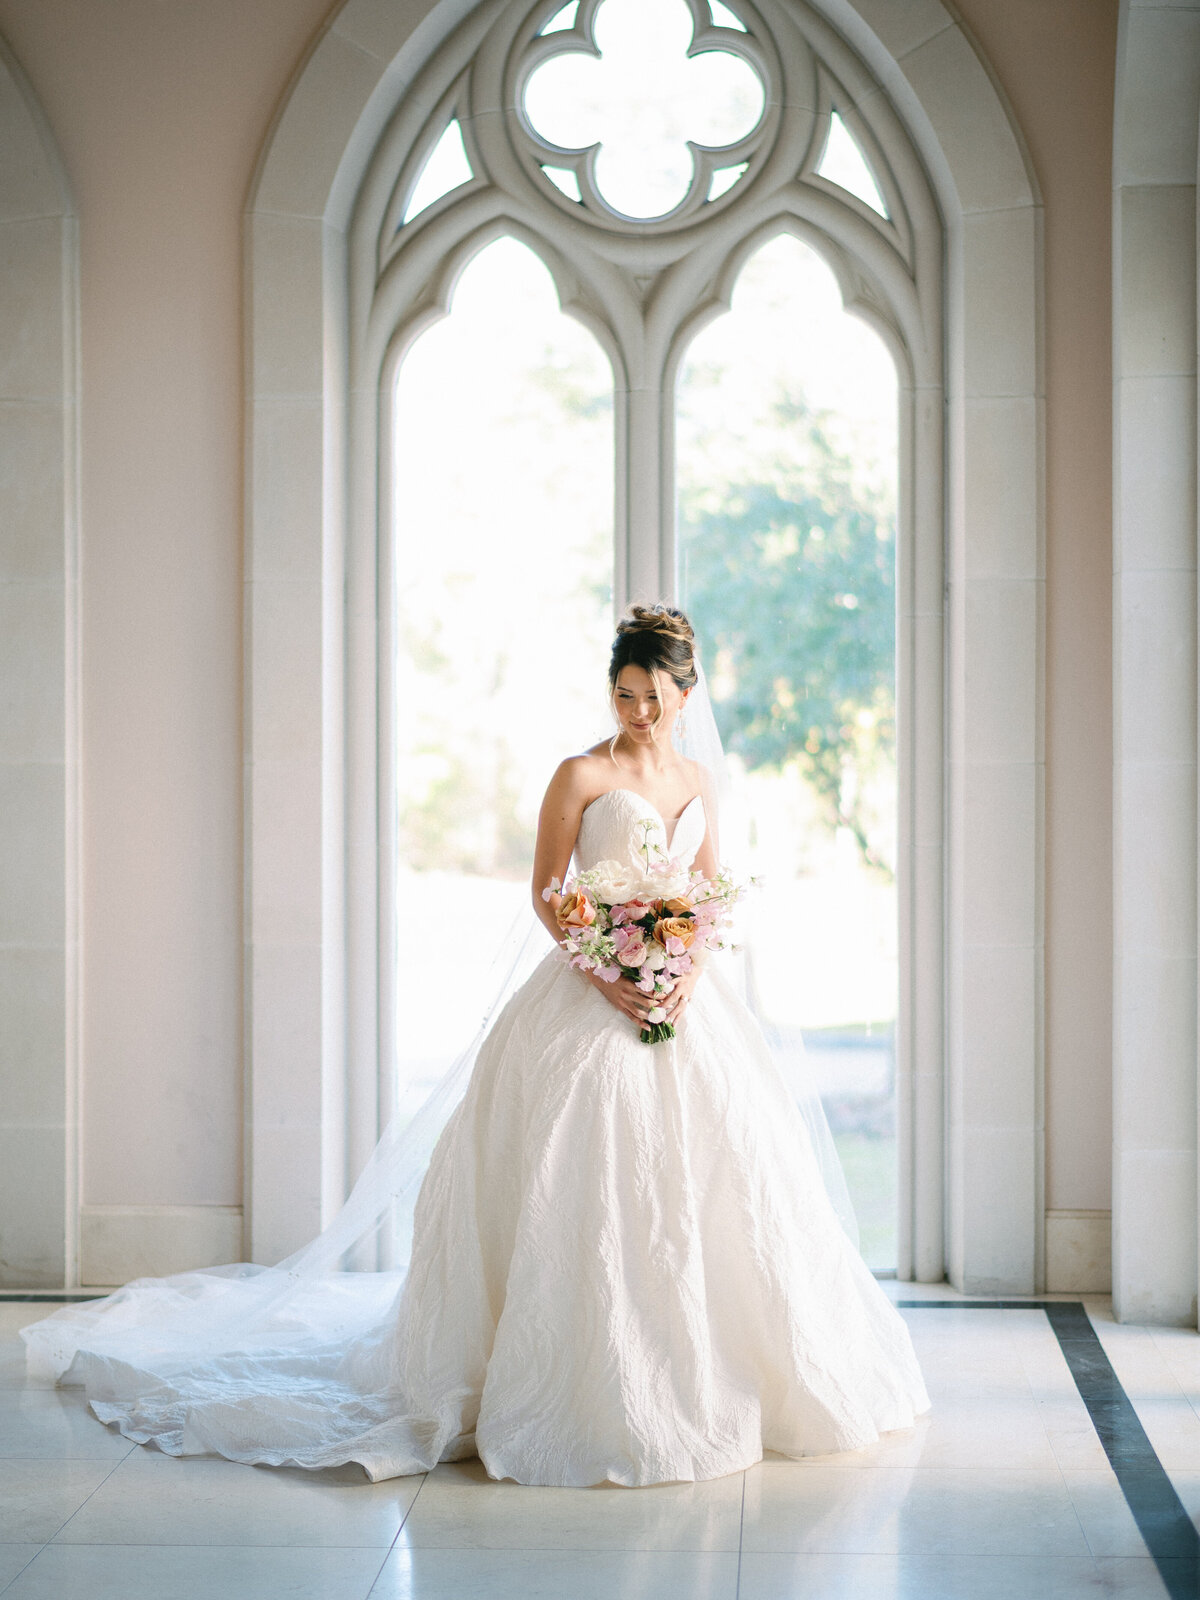 Bride by window in beautiful gown smiling with pretty bouquet